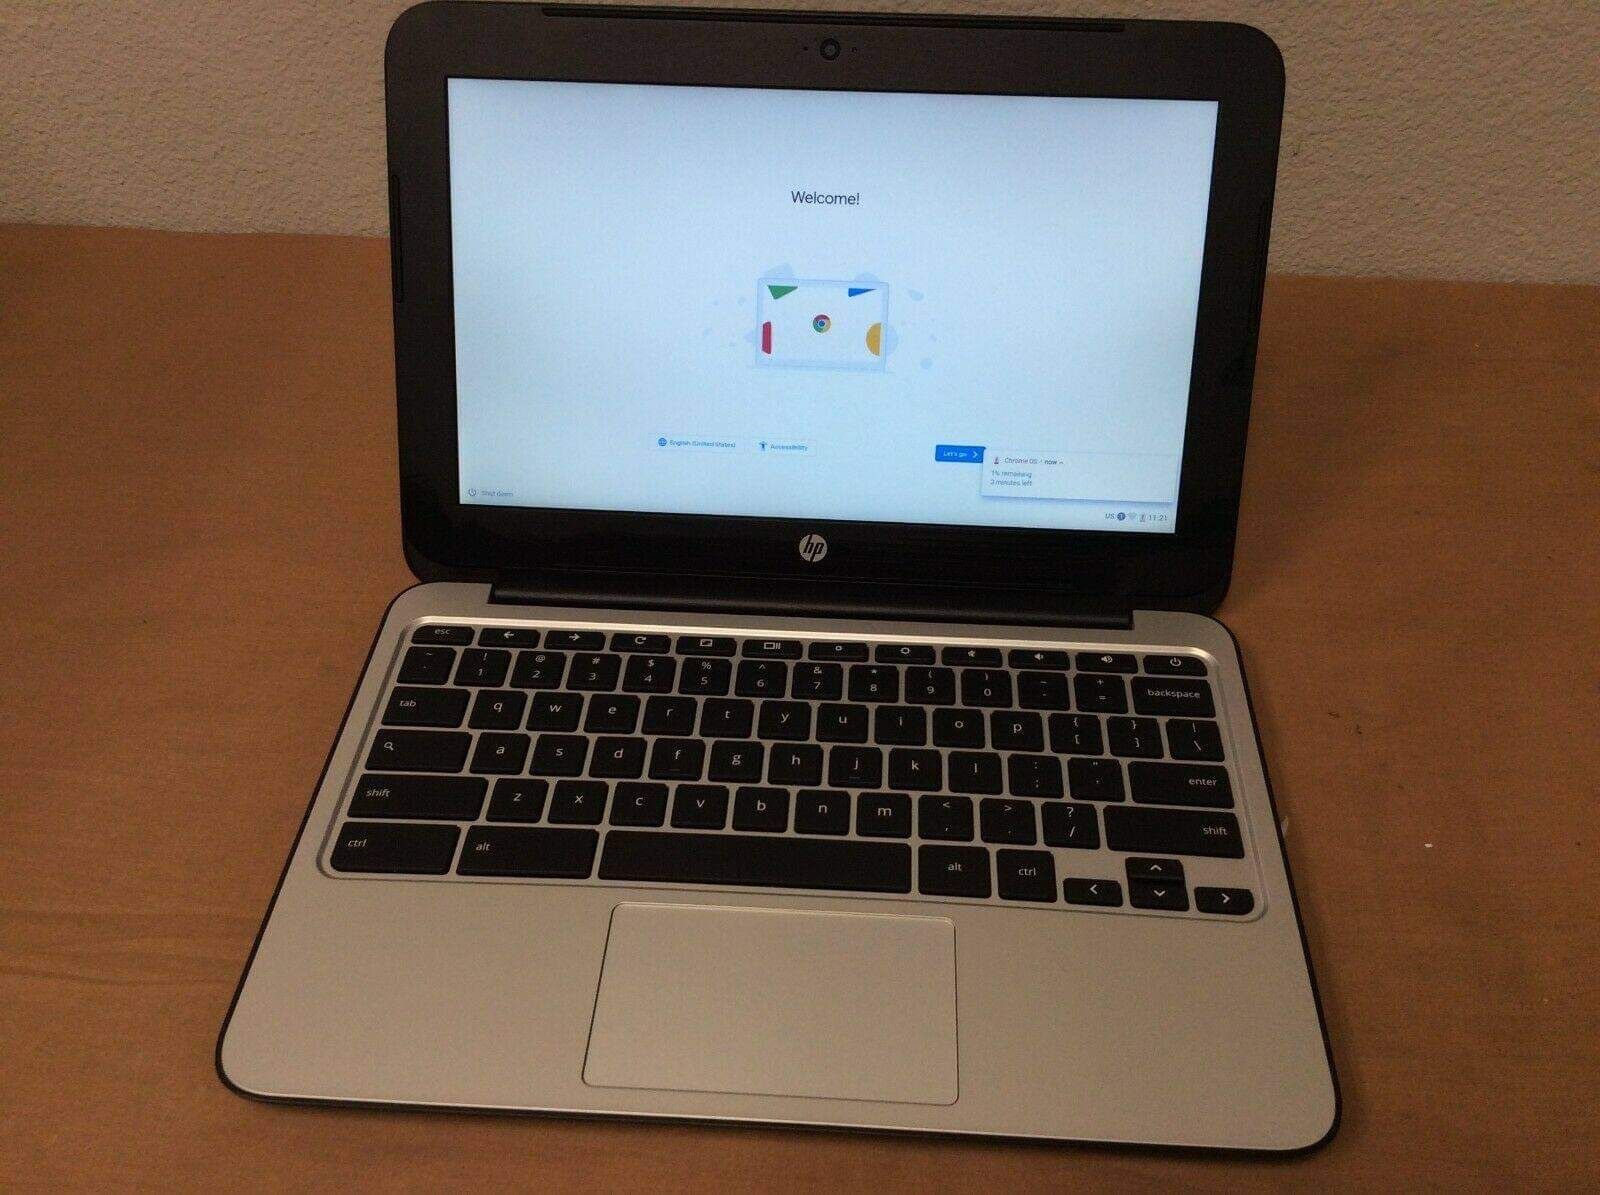 HP Chromebook Chromebook 4GB RAM 16GB webcam /Bluetooth/HDMIport/charger $ 129 firm price